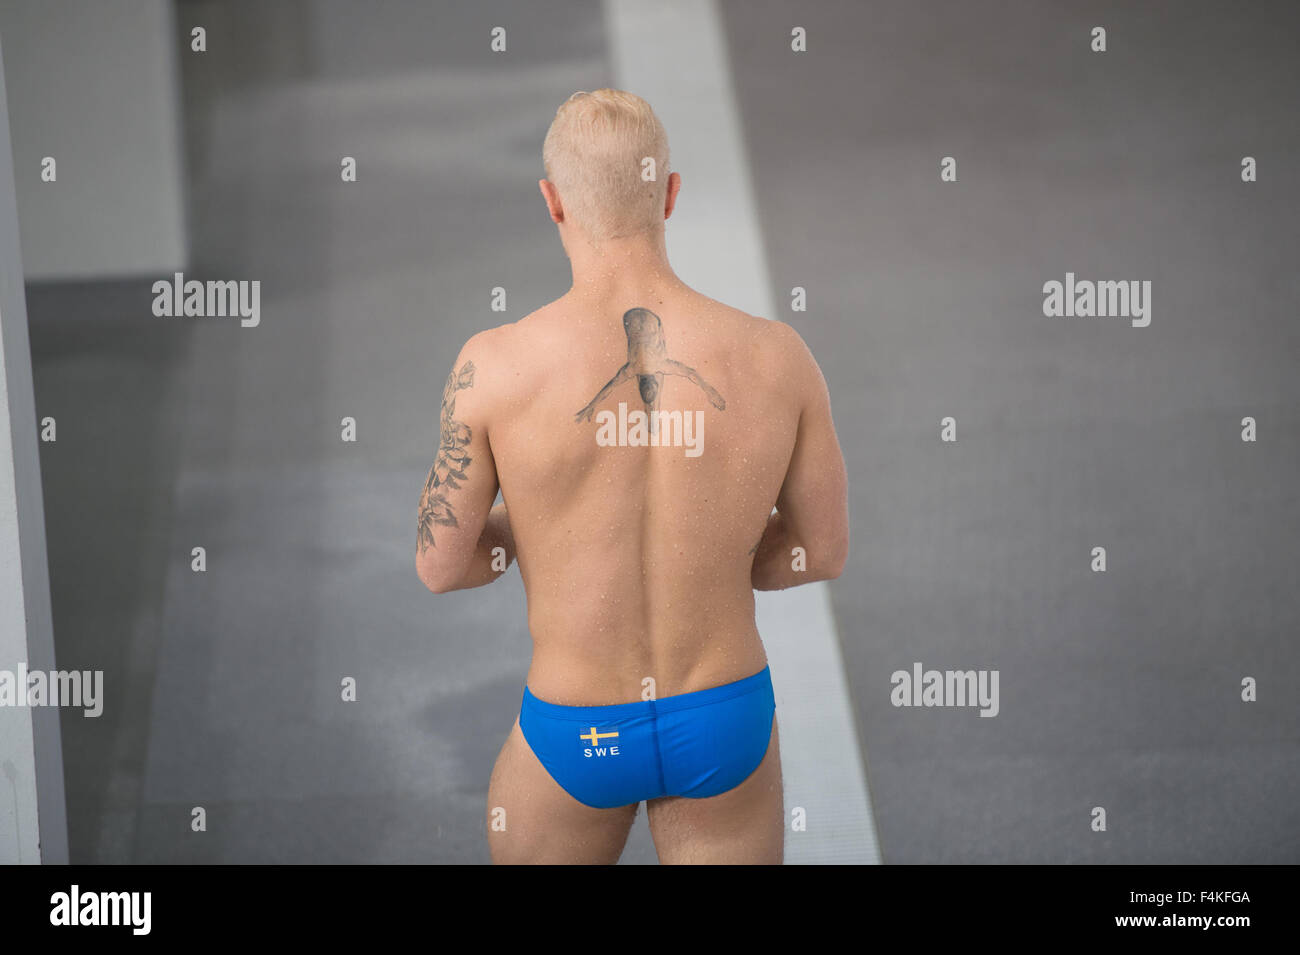 Tolvers Jesper (SWE) the diving tattoo on his back in the FINA Diving Grand Prix 2015 (Singapore) at the OCBC Aquatic Centre on 18 Oct 2015 in Singapore. He won bronze medal in the 10m platform event. (Photo by Haruhiko Otsuka/AFLO Stock Photo